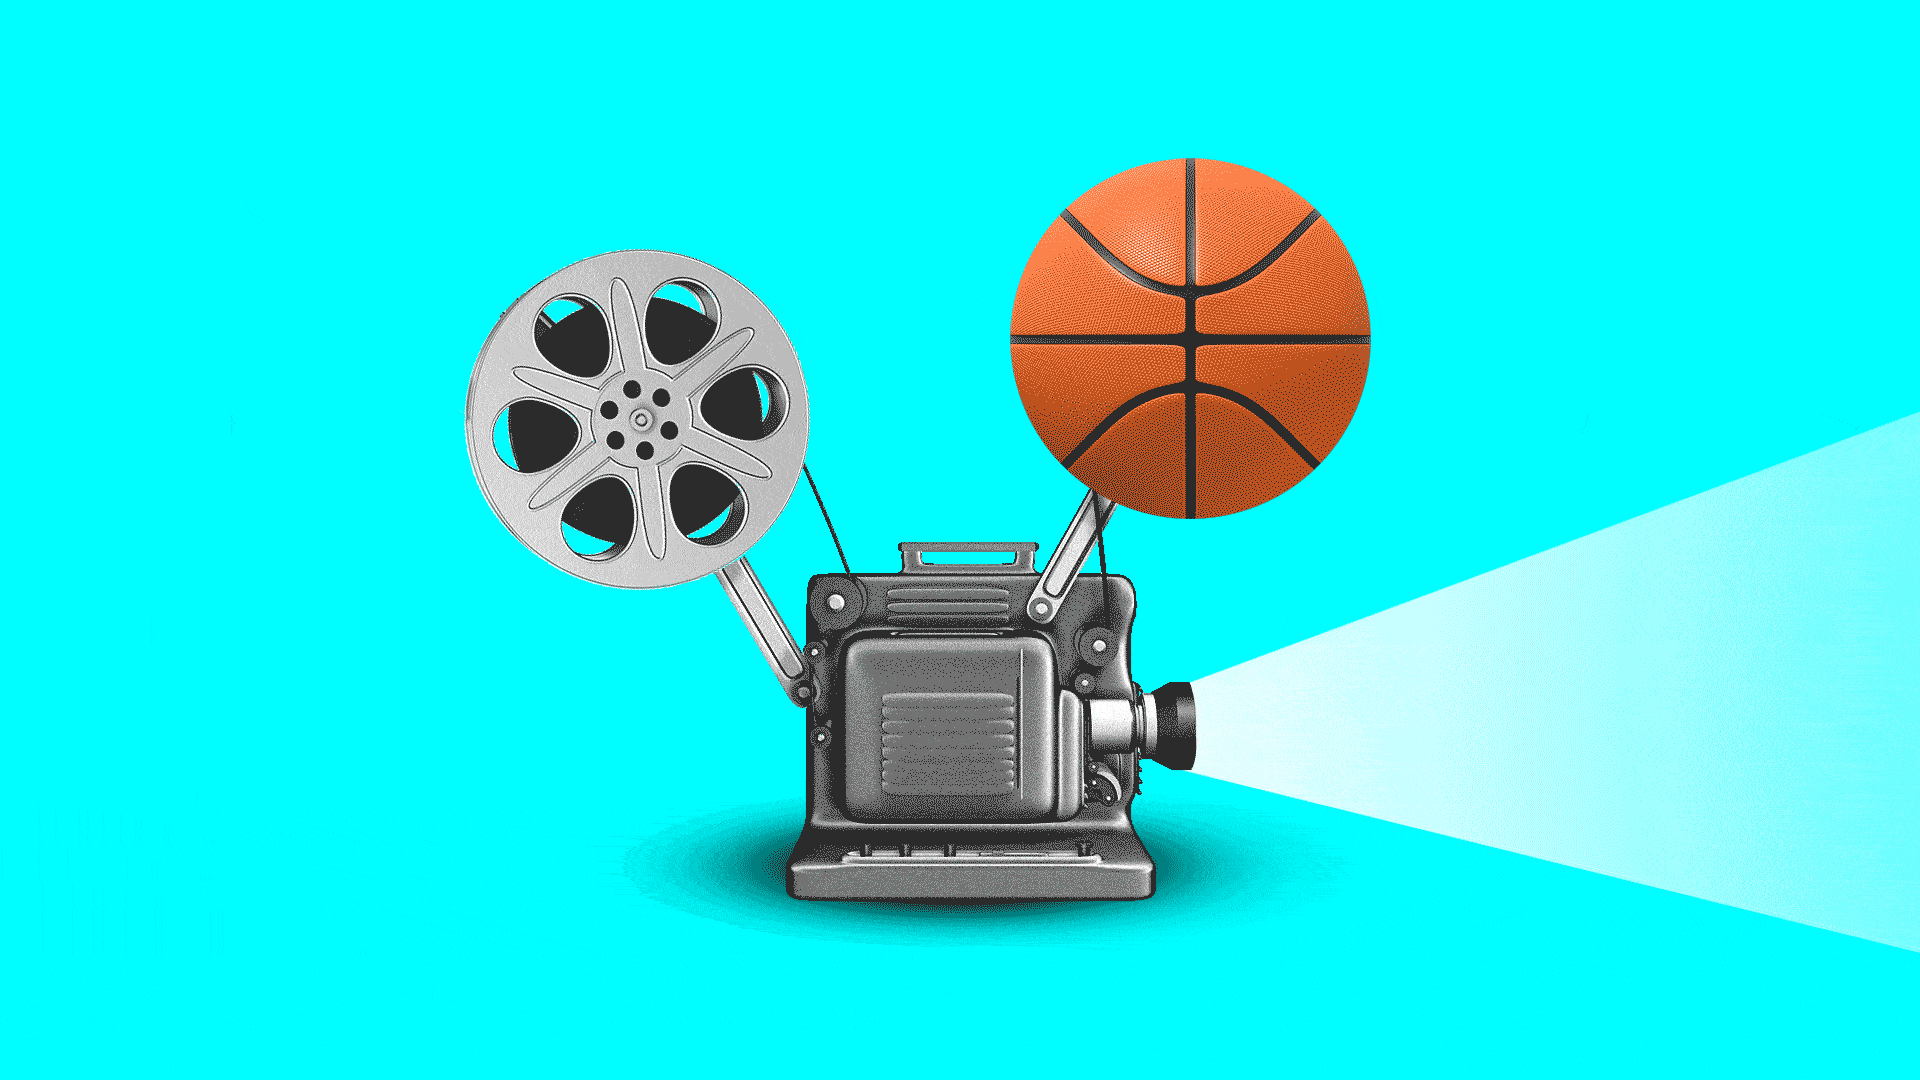 Animated illustration of a film projector with  one of the reels replaced by a basketball